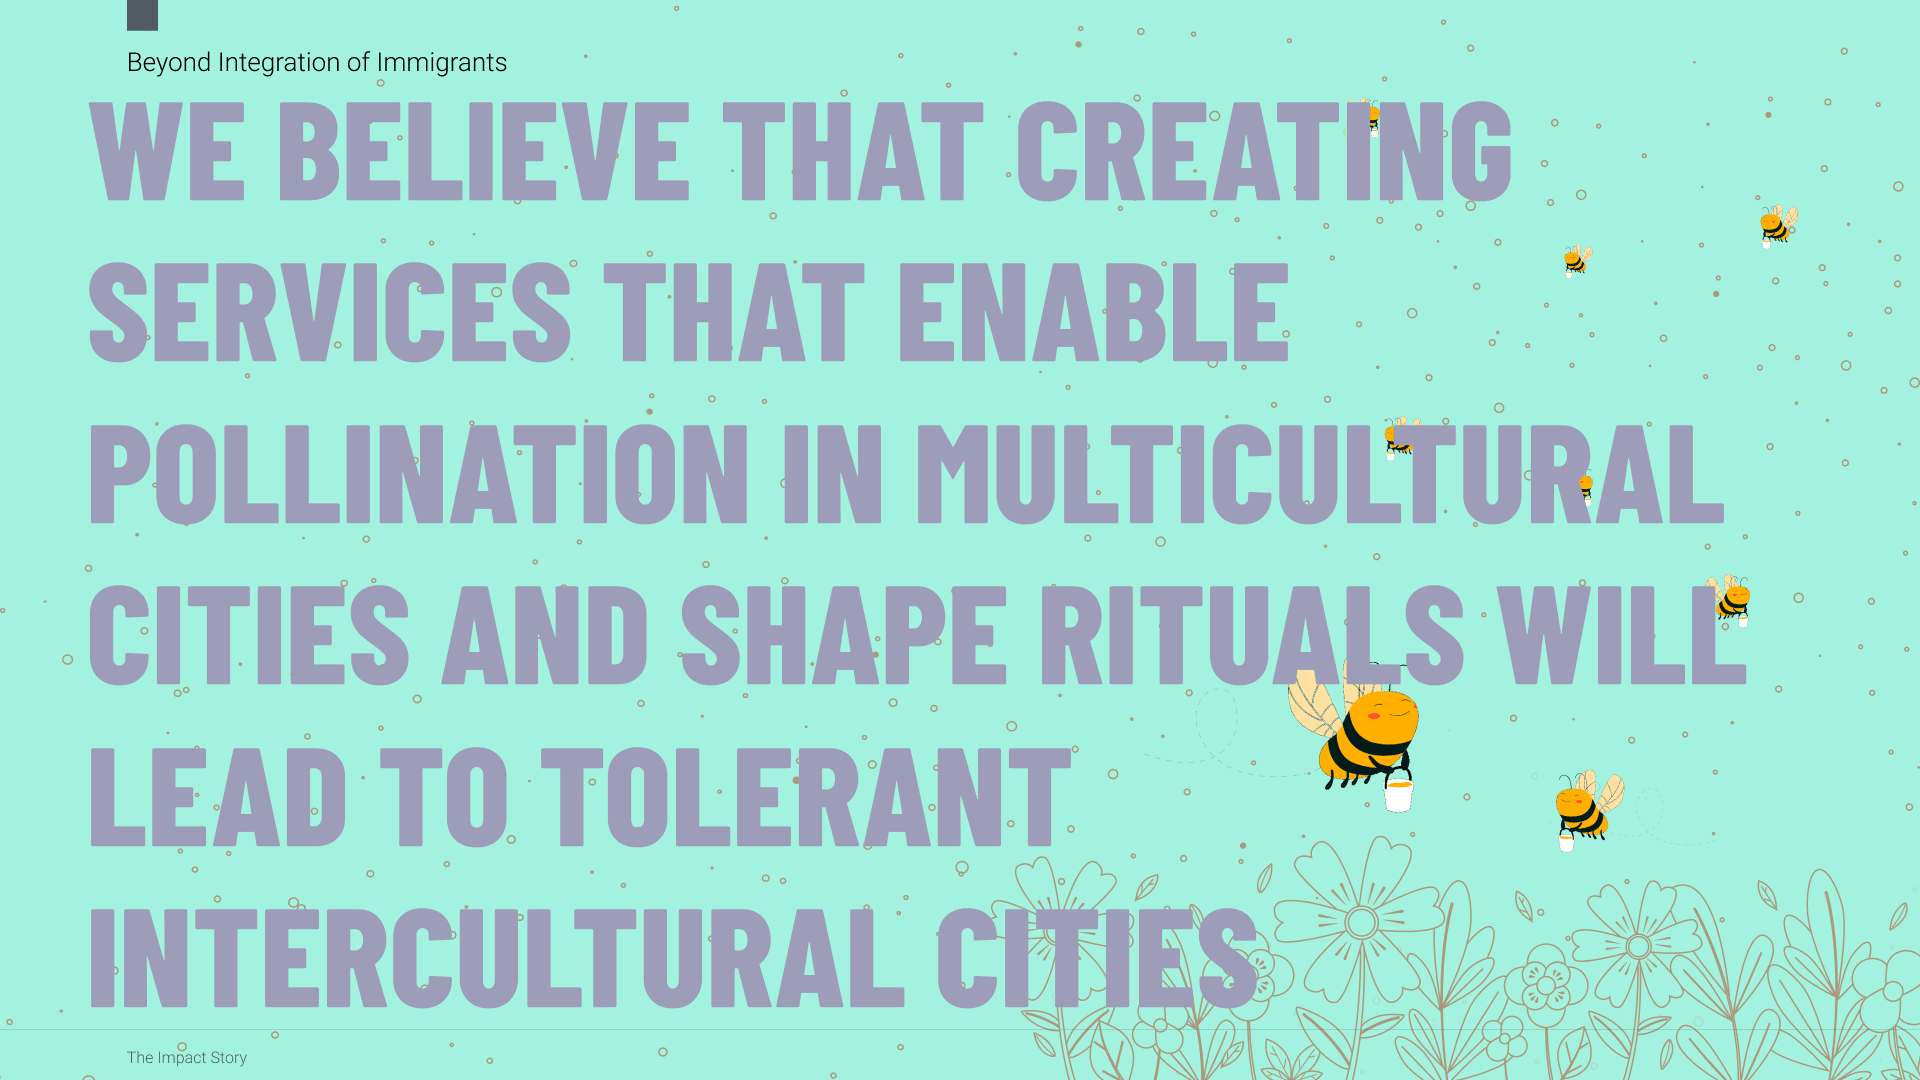 We believe that creating services that enable pollination in multicultural cities and shape rituals will create tolerance